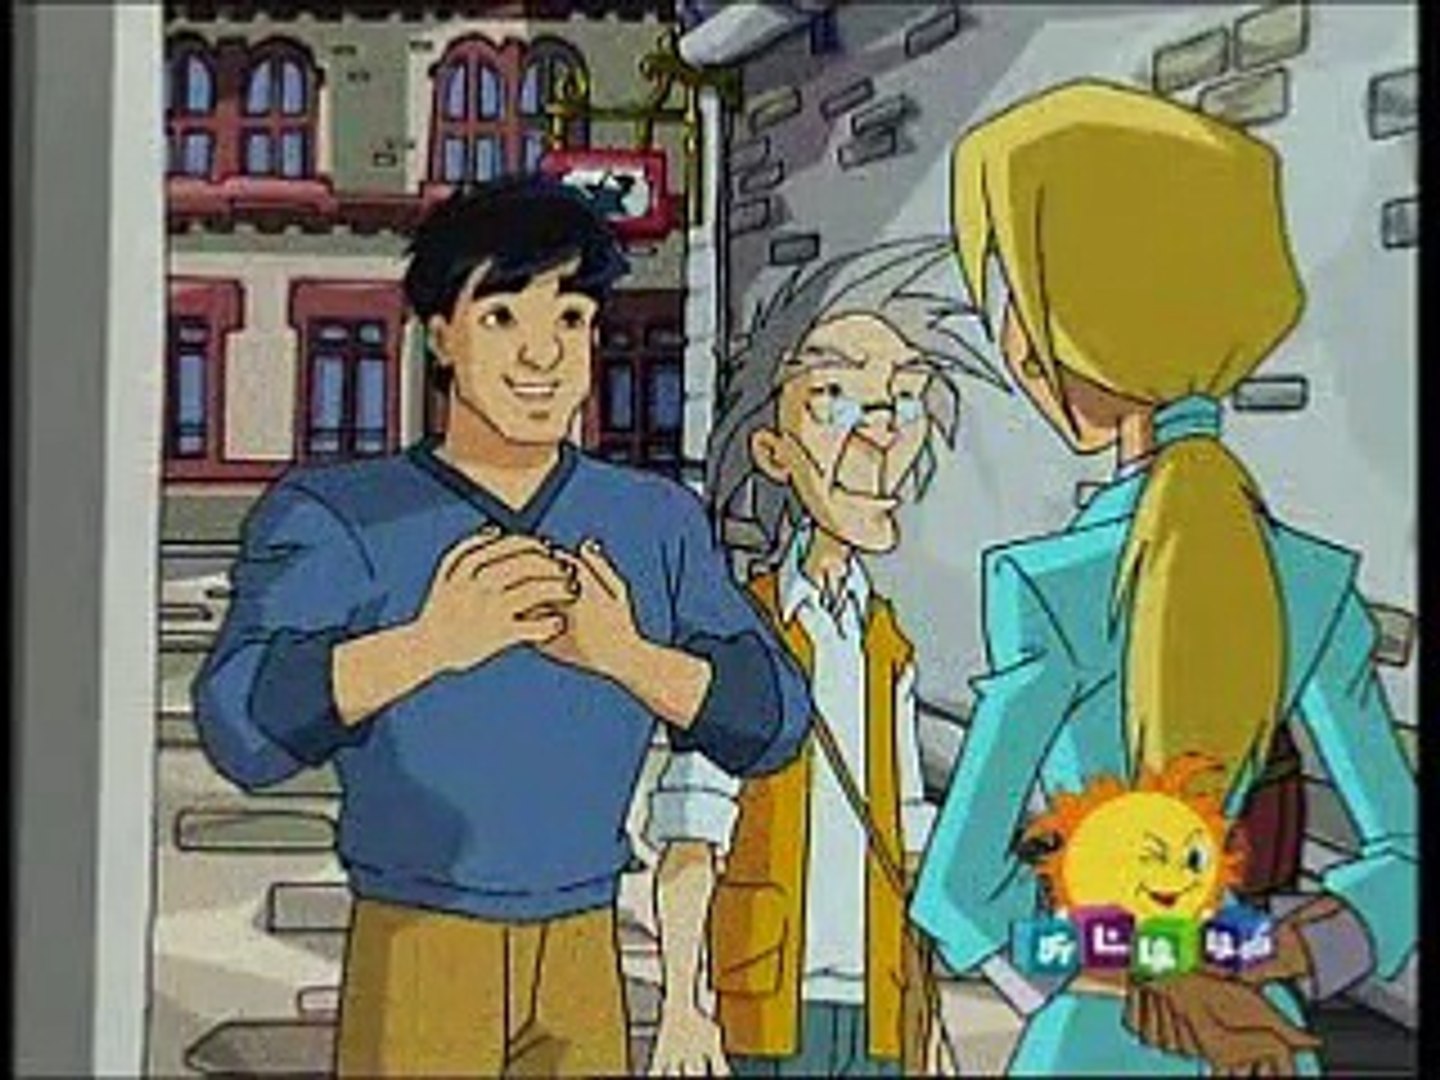 JACKIE CHAN ADVENTURES - Mountain evil power(Tamil) - video Dailymotion